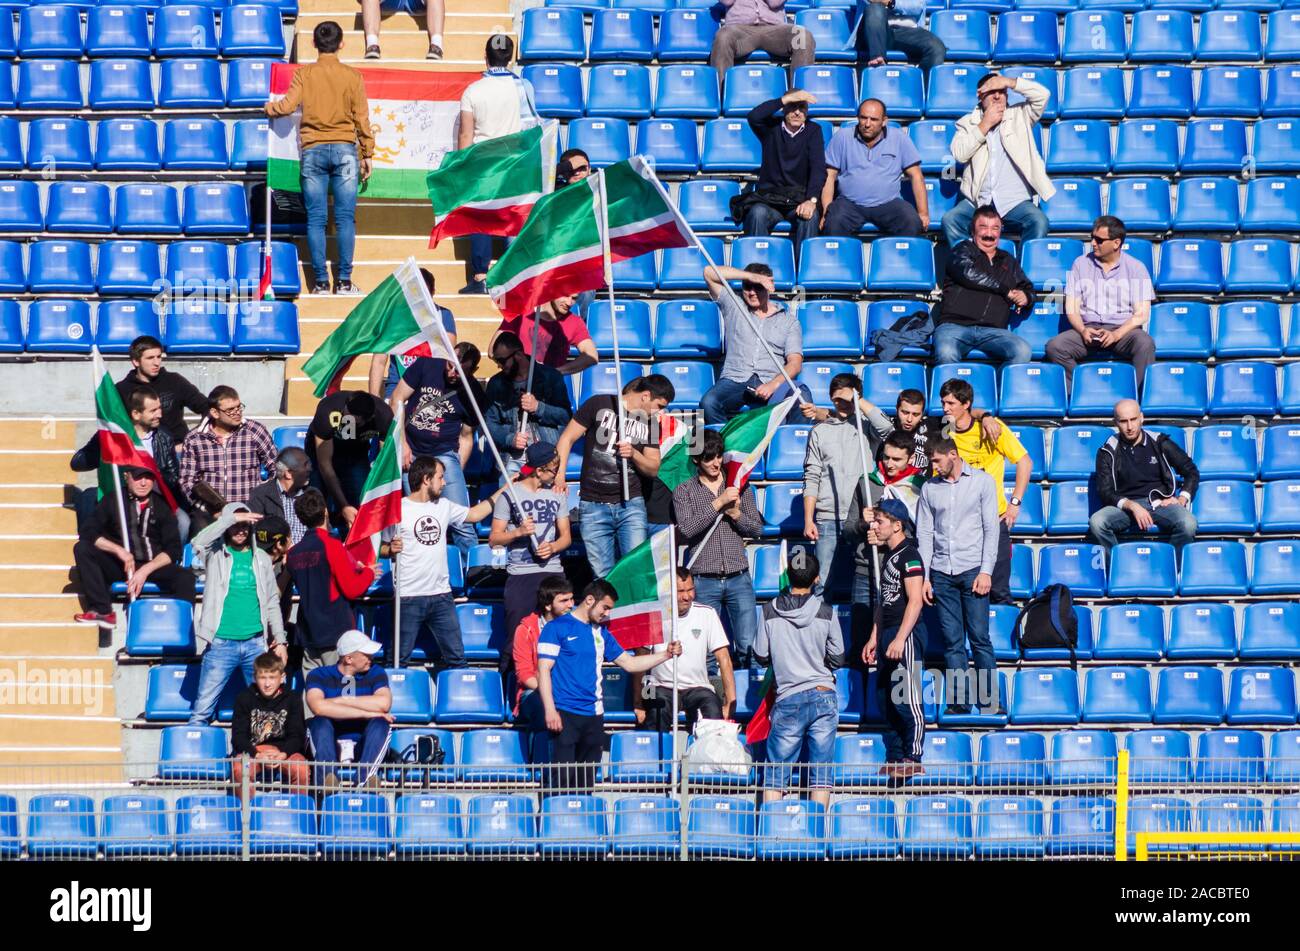 SAINT-PETERSBURG, RUSSIA - AUGUST 1: Fans of Football Club Terek Grozny at the match of Championship of Russia with Zenit on August 1, 2015 in Saint-P Stock Photo